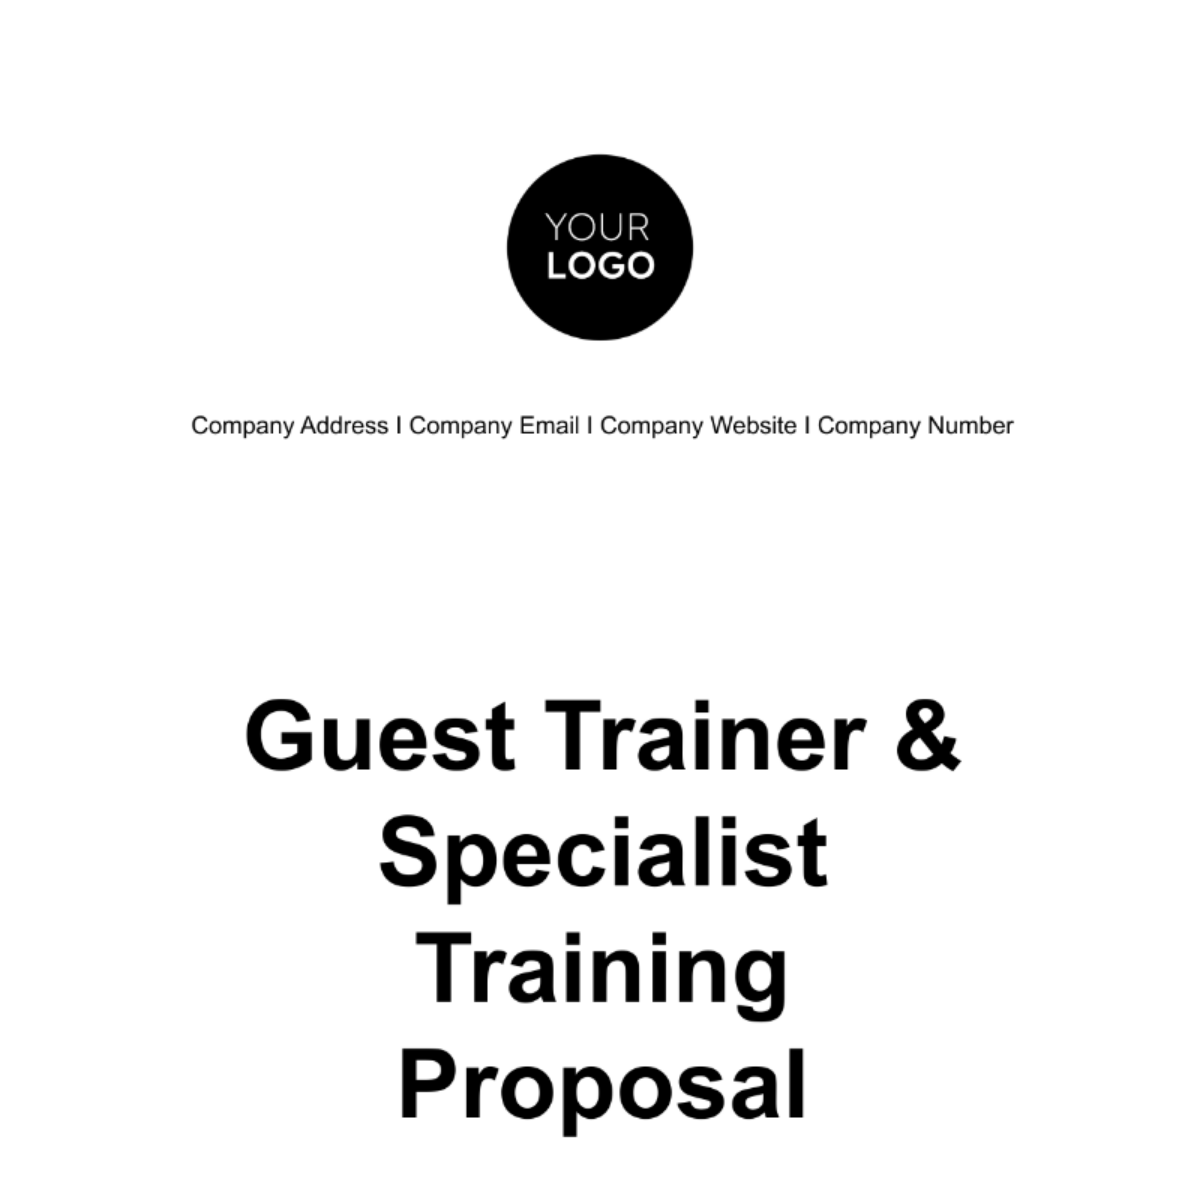 Guest Trainer & Specialist Training Proposal HR Template